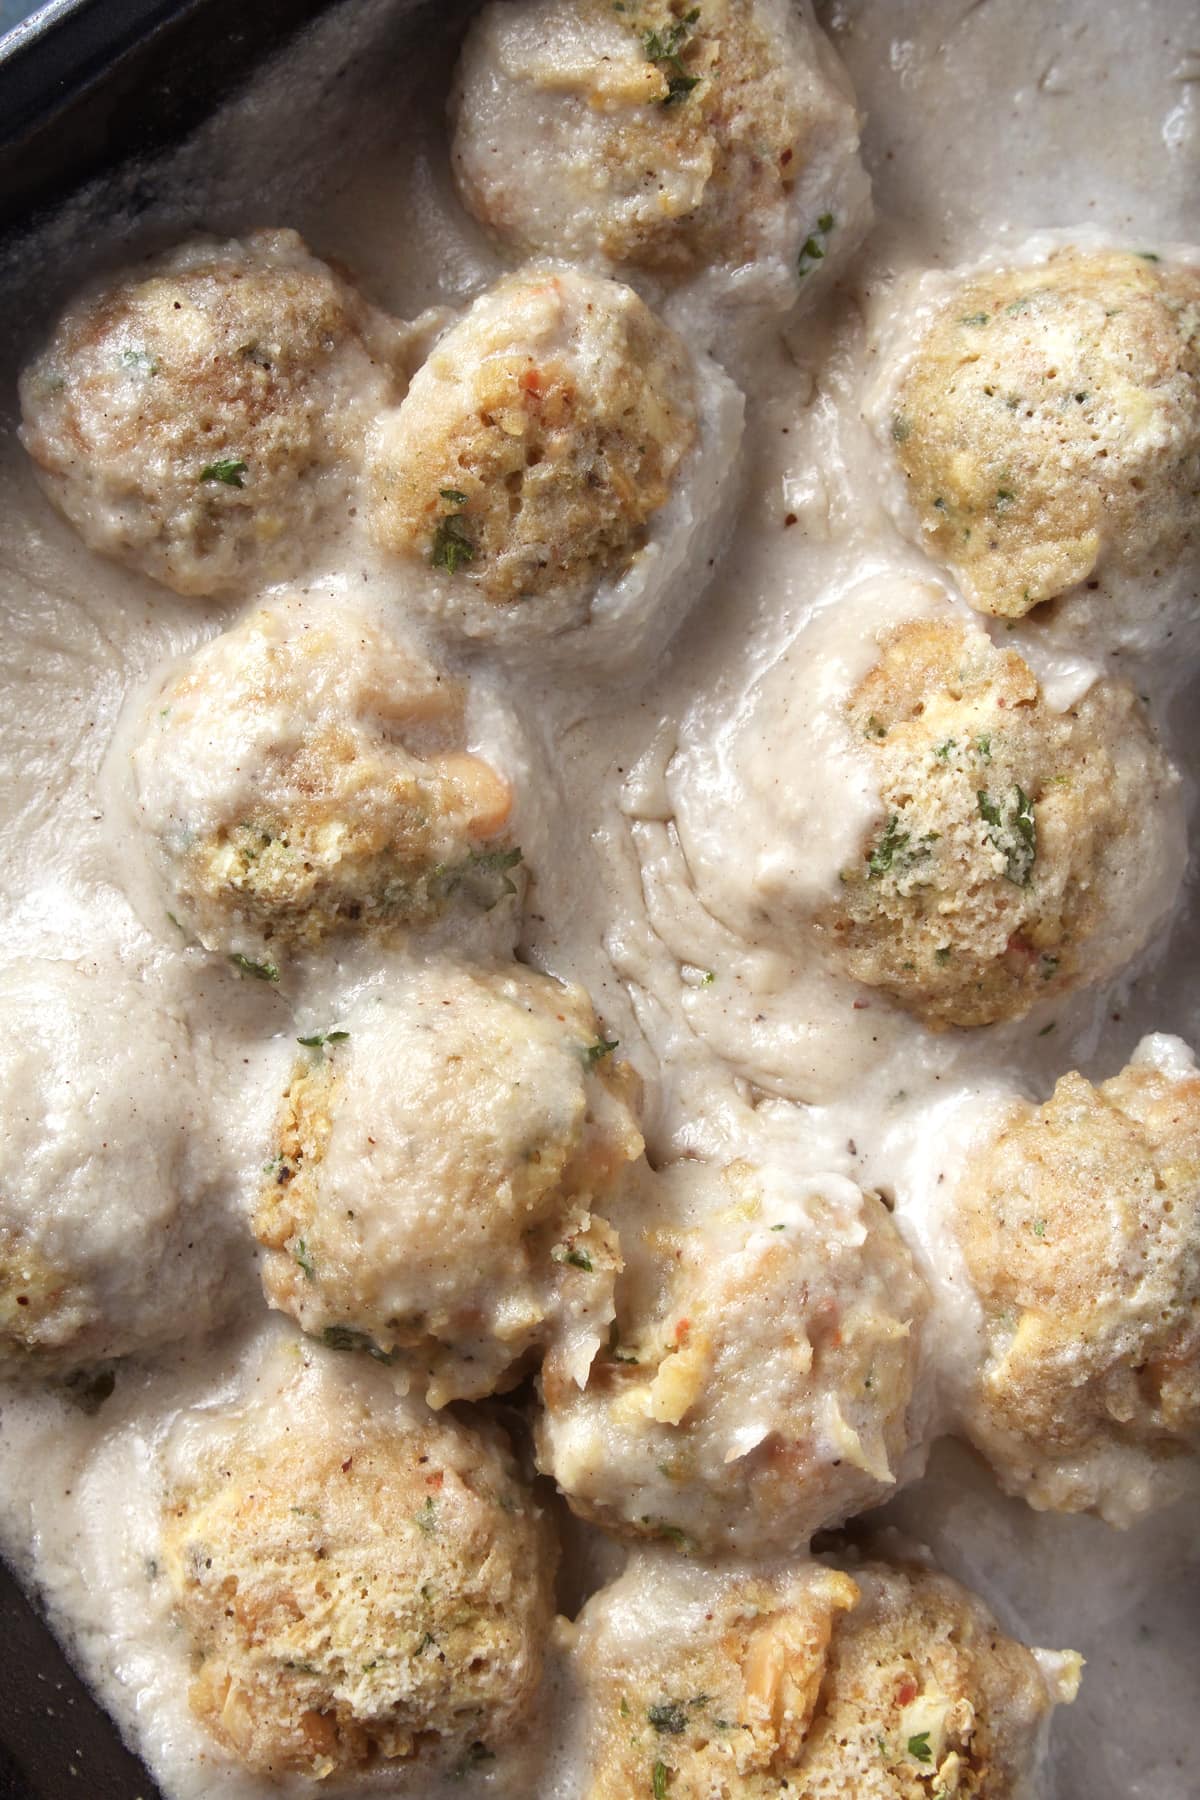 Who says comfort food has to be unhealthy? These vegan Swedish meatballs are not only absolutely delicious, but healthy too! Using ingredients like white beans, oats, and cashews gives this meal a healthy kick while giving you all the comfort feels. #vegancomfortfood #veganswedishmeatballs #veganswedishmeatballsgravy #vegandinner #vegandinnerrecipes #veganmeatballsbeans #bohemianvegankitchen 